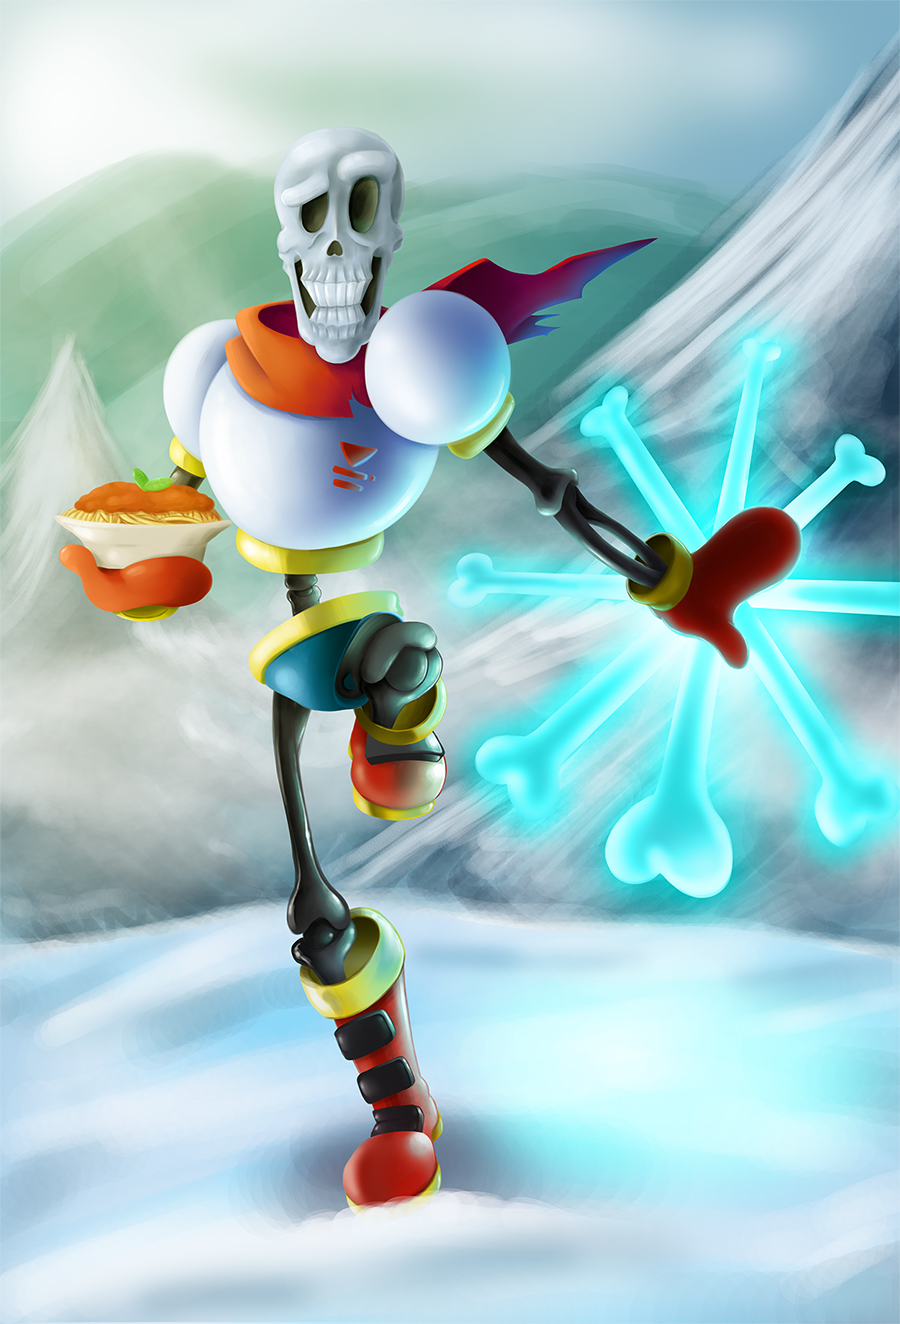 Papyrus From Undertale By Capitanusop On Deviantart